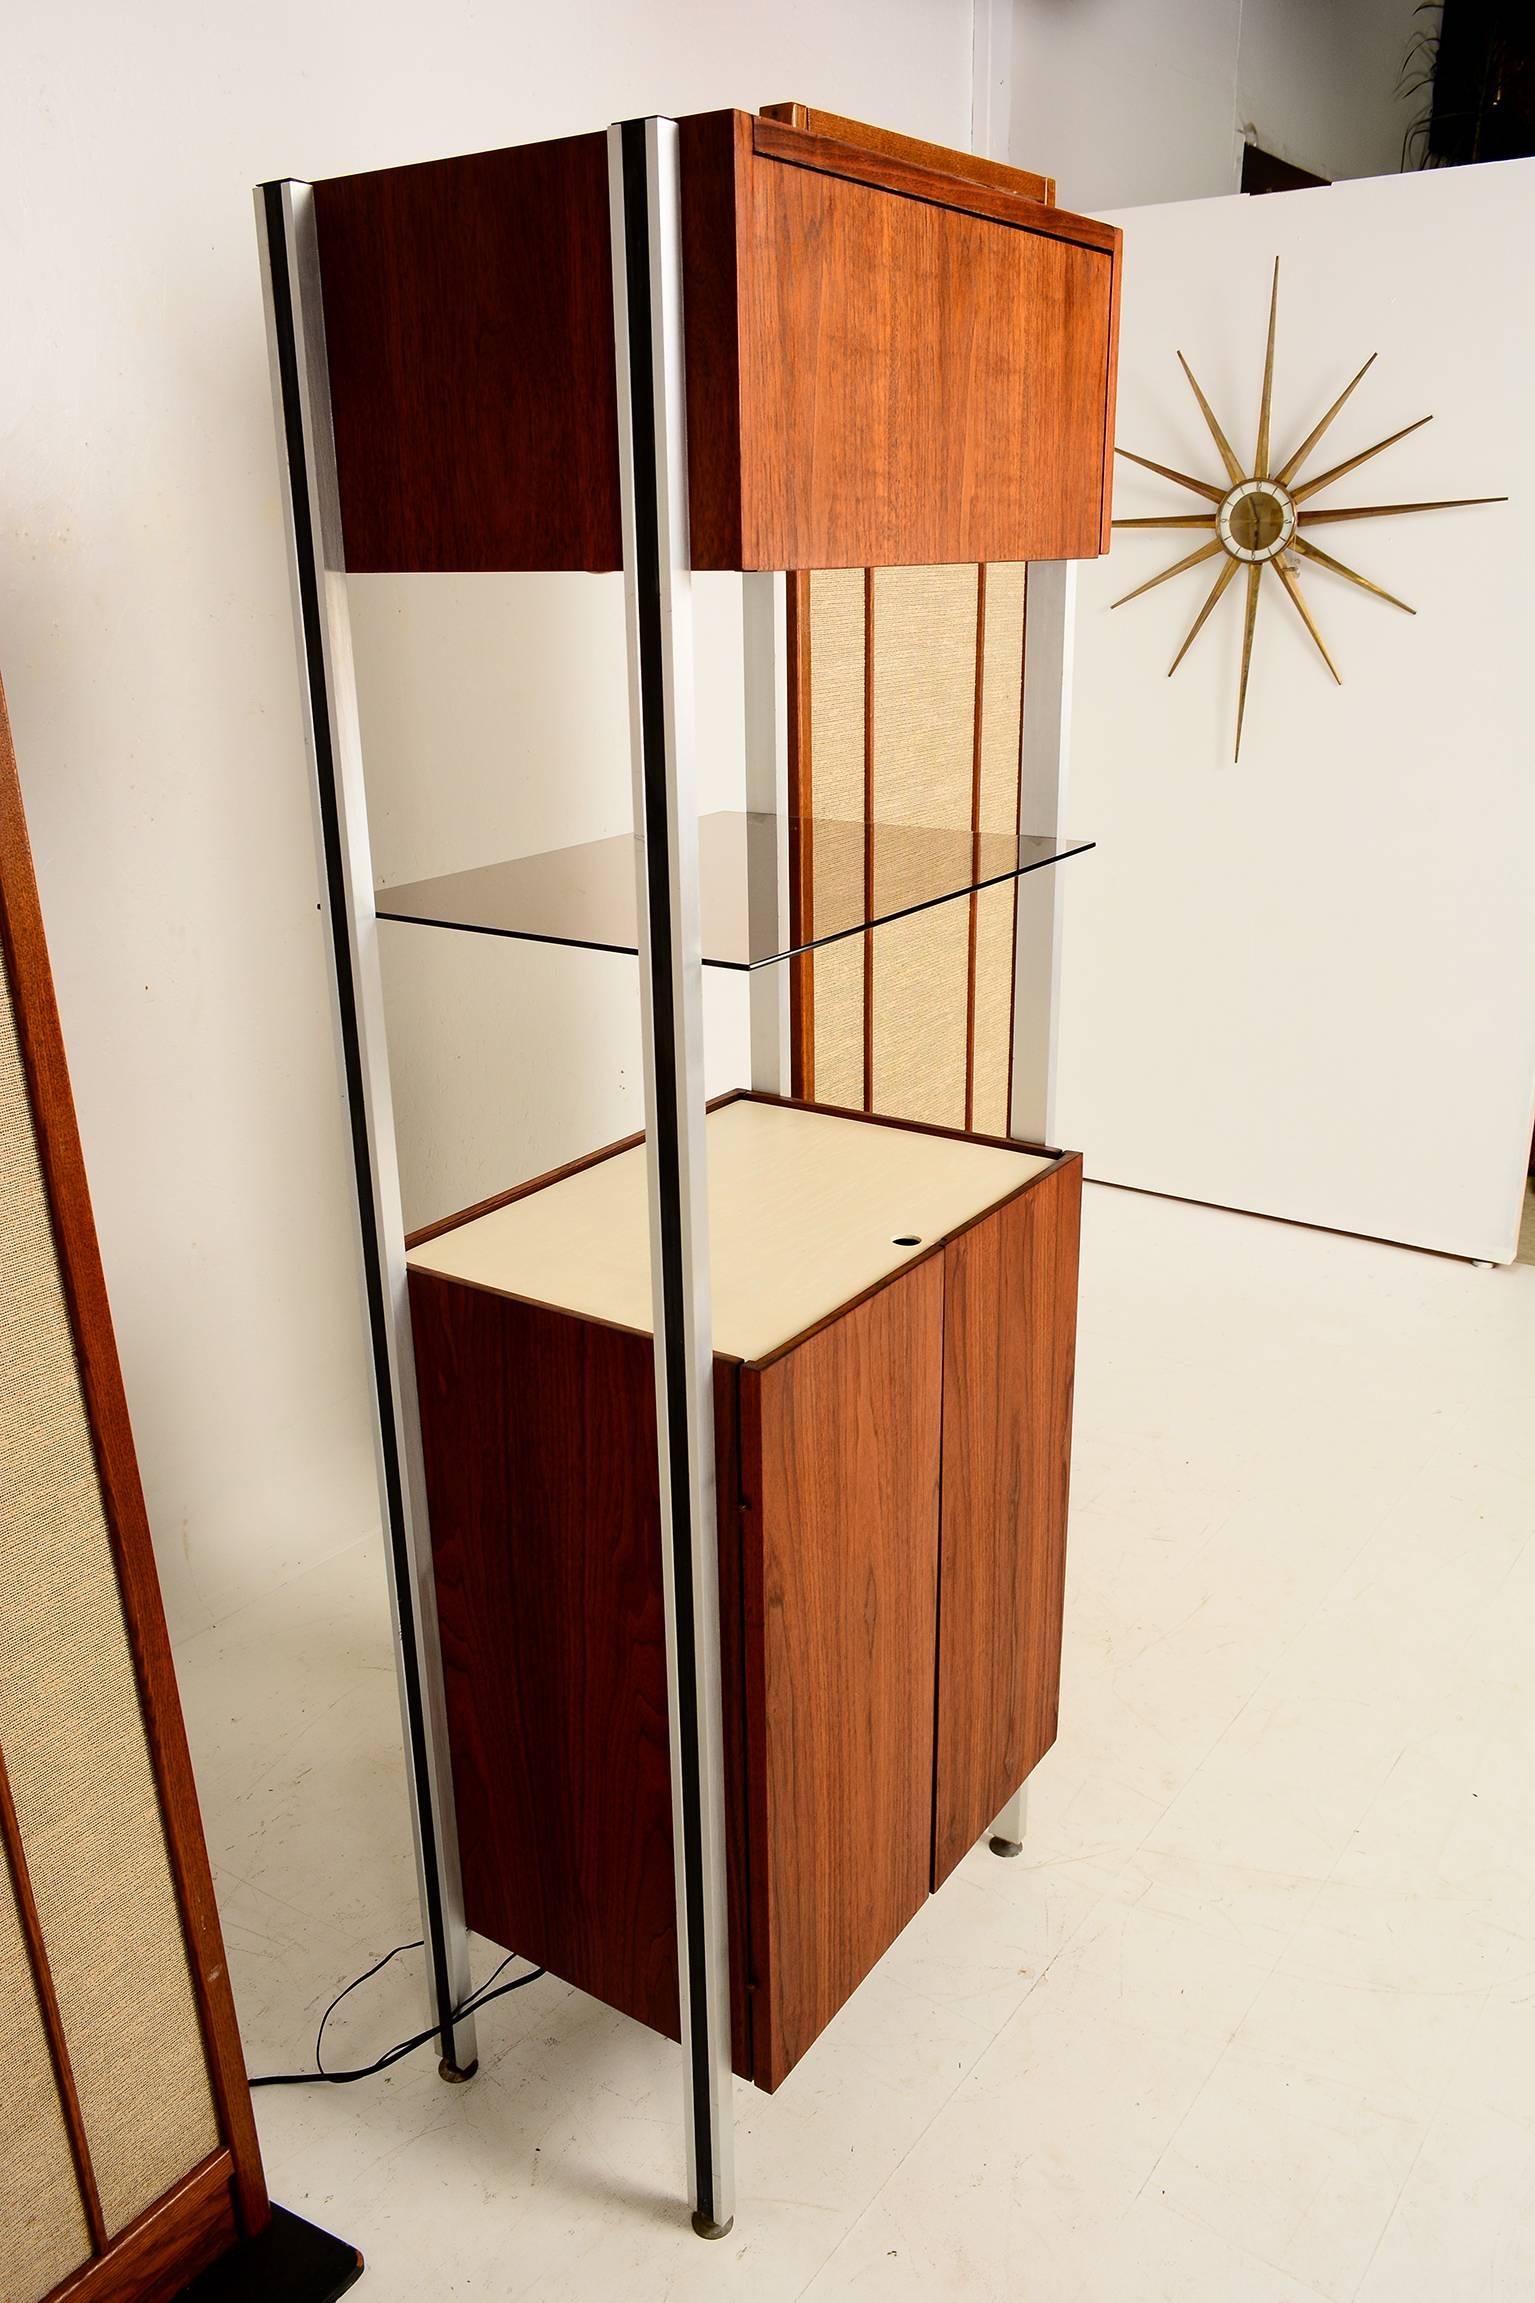 American Midcentury Wall Unit Stereo Cabinet in Walnut and Aluminium, 1960s